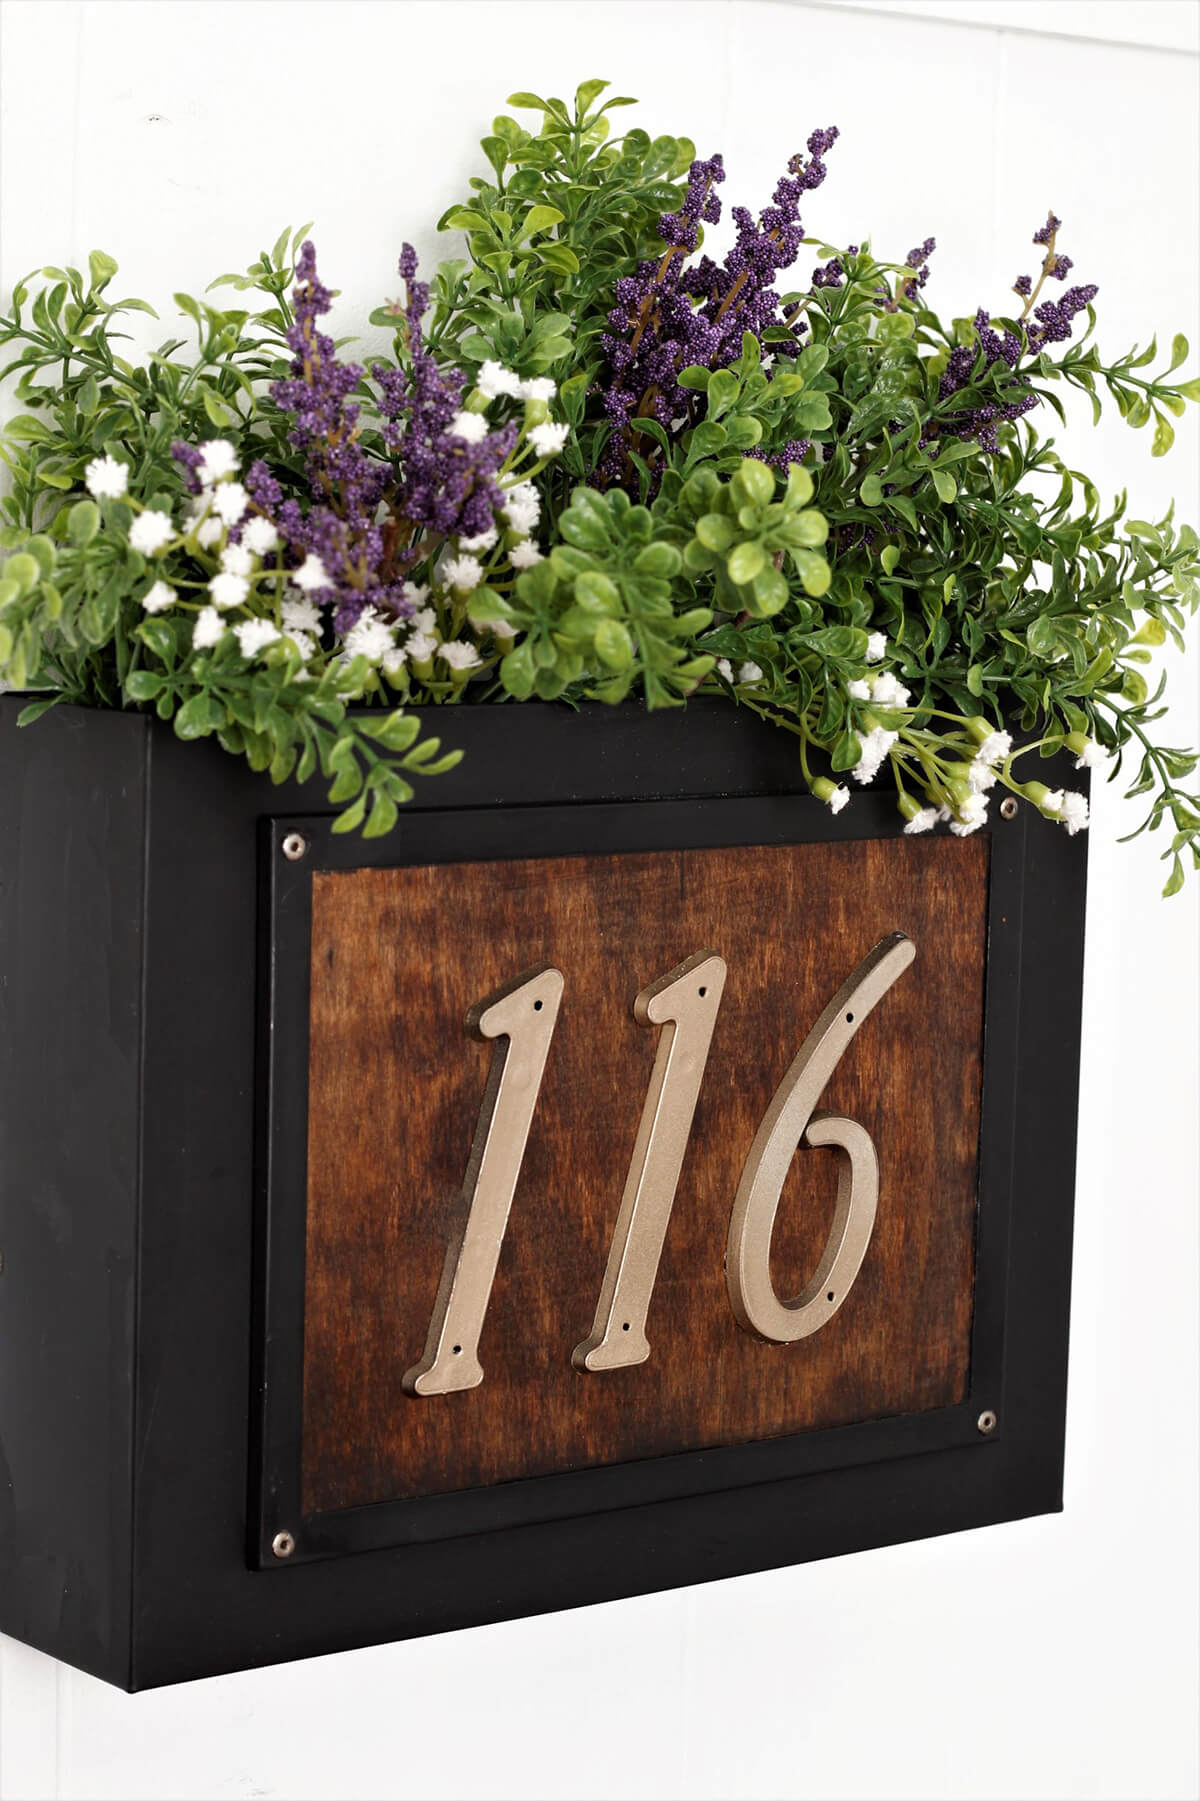 Compact Rustic Style Address Planter